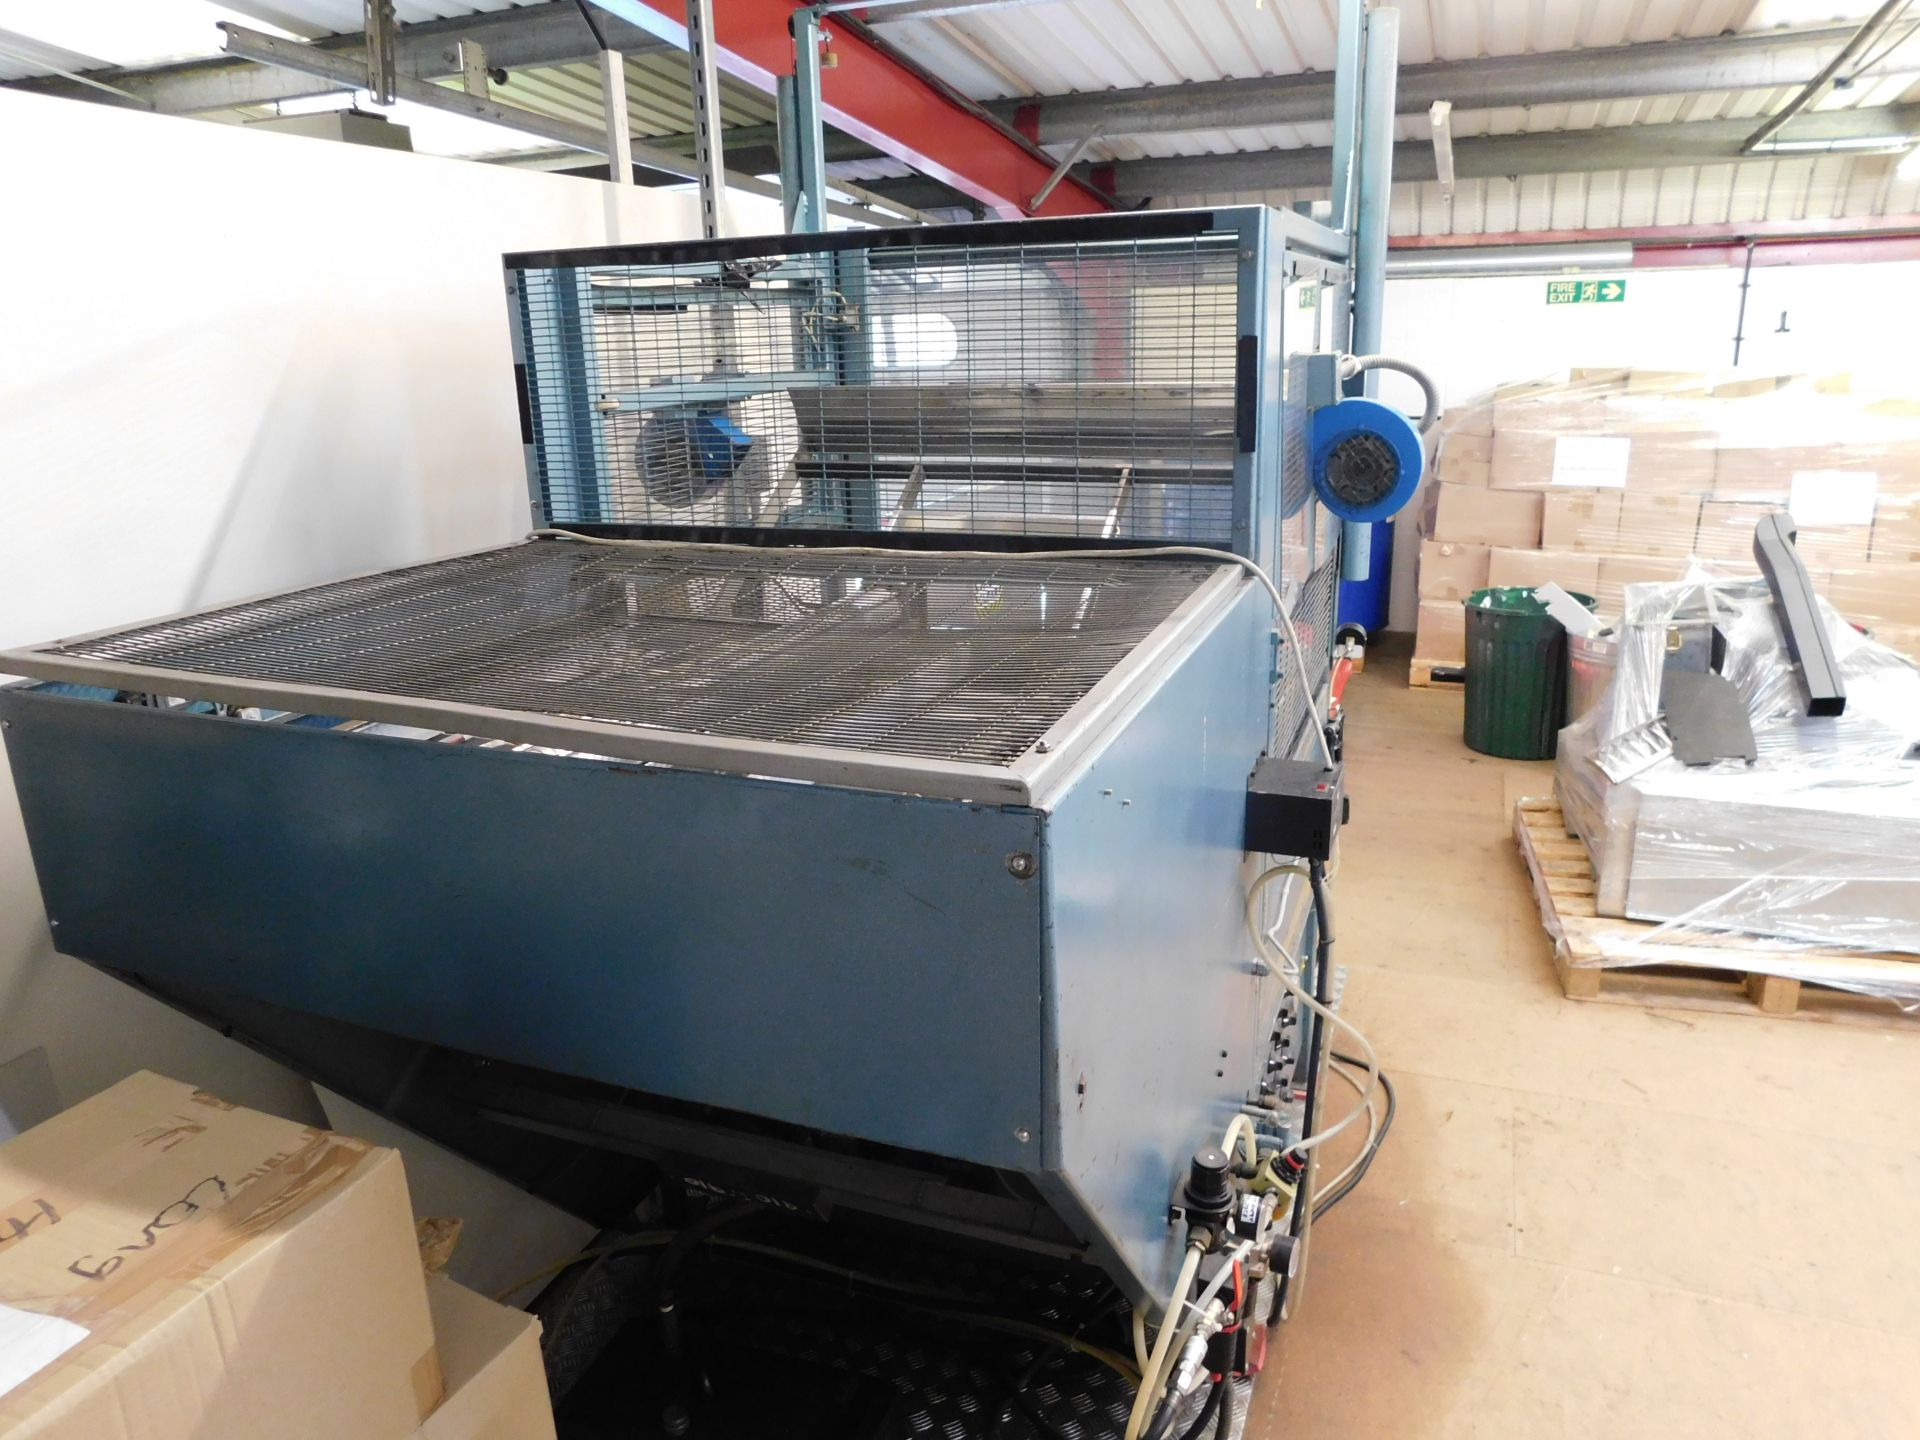 Schumaker 40305M Vacuum Forming Machine With Meech Static Elimination Unit (Located Mezzanine) ( - Image 4 of 5